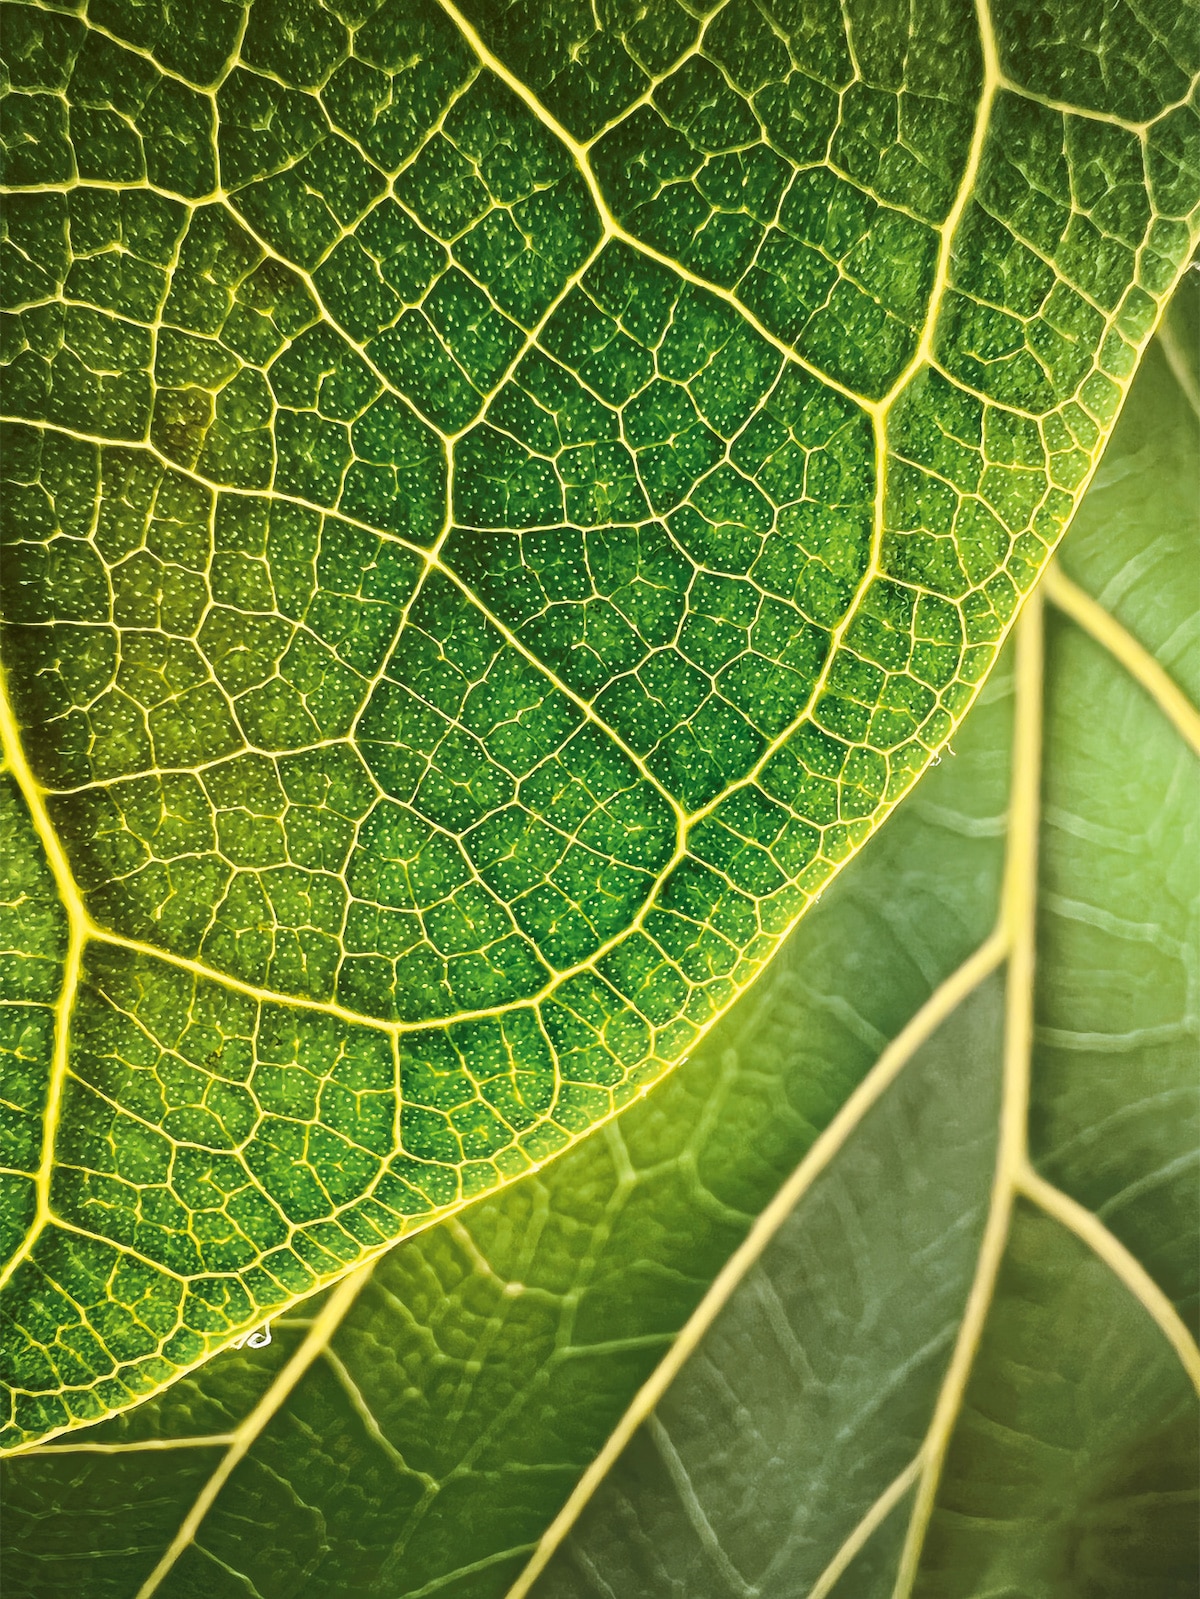 Detailed Close Up Photo of a Green Leaf